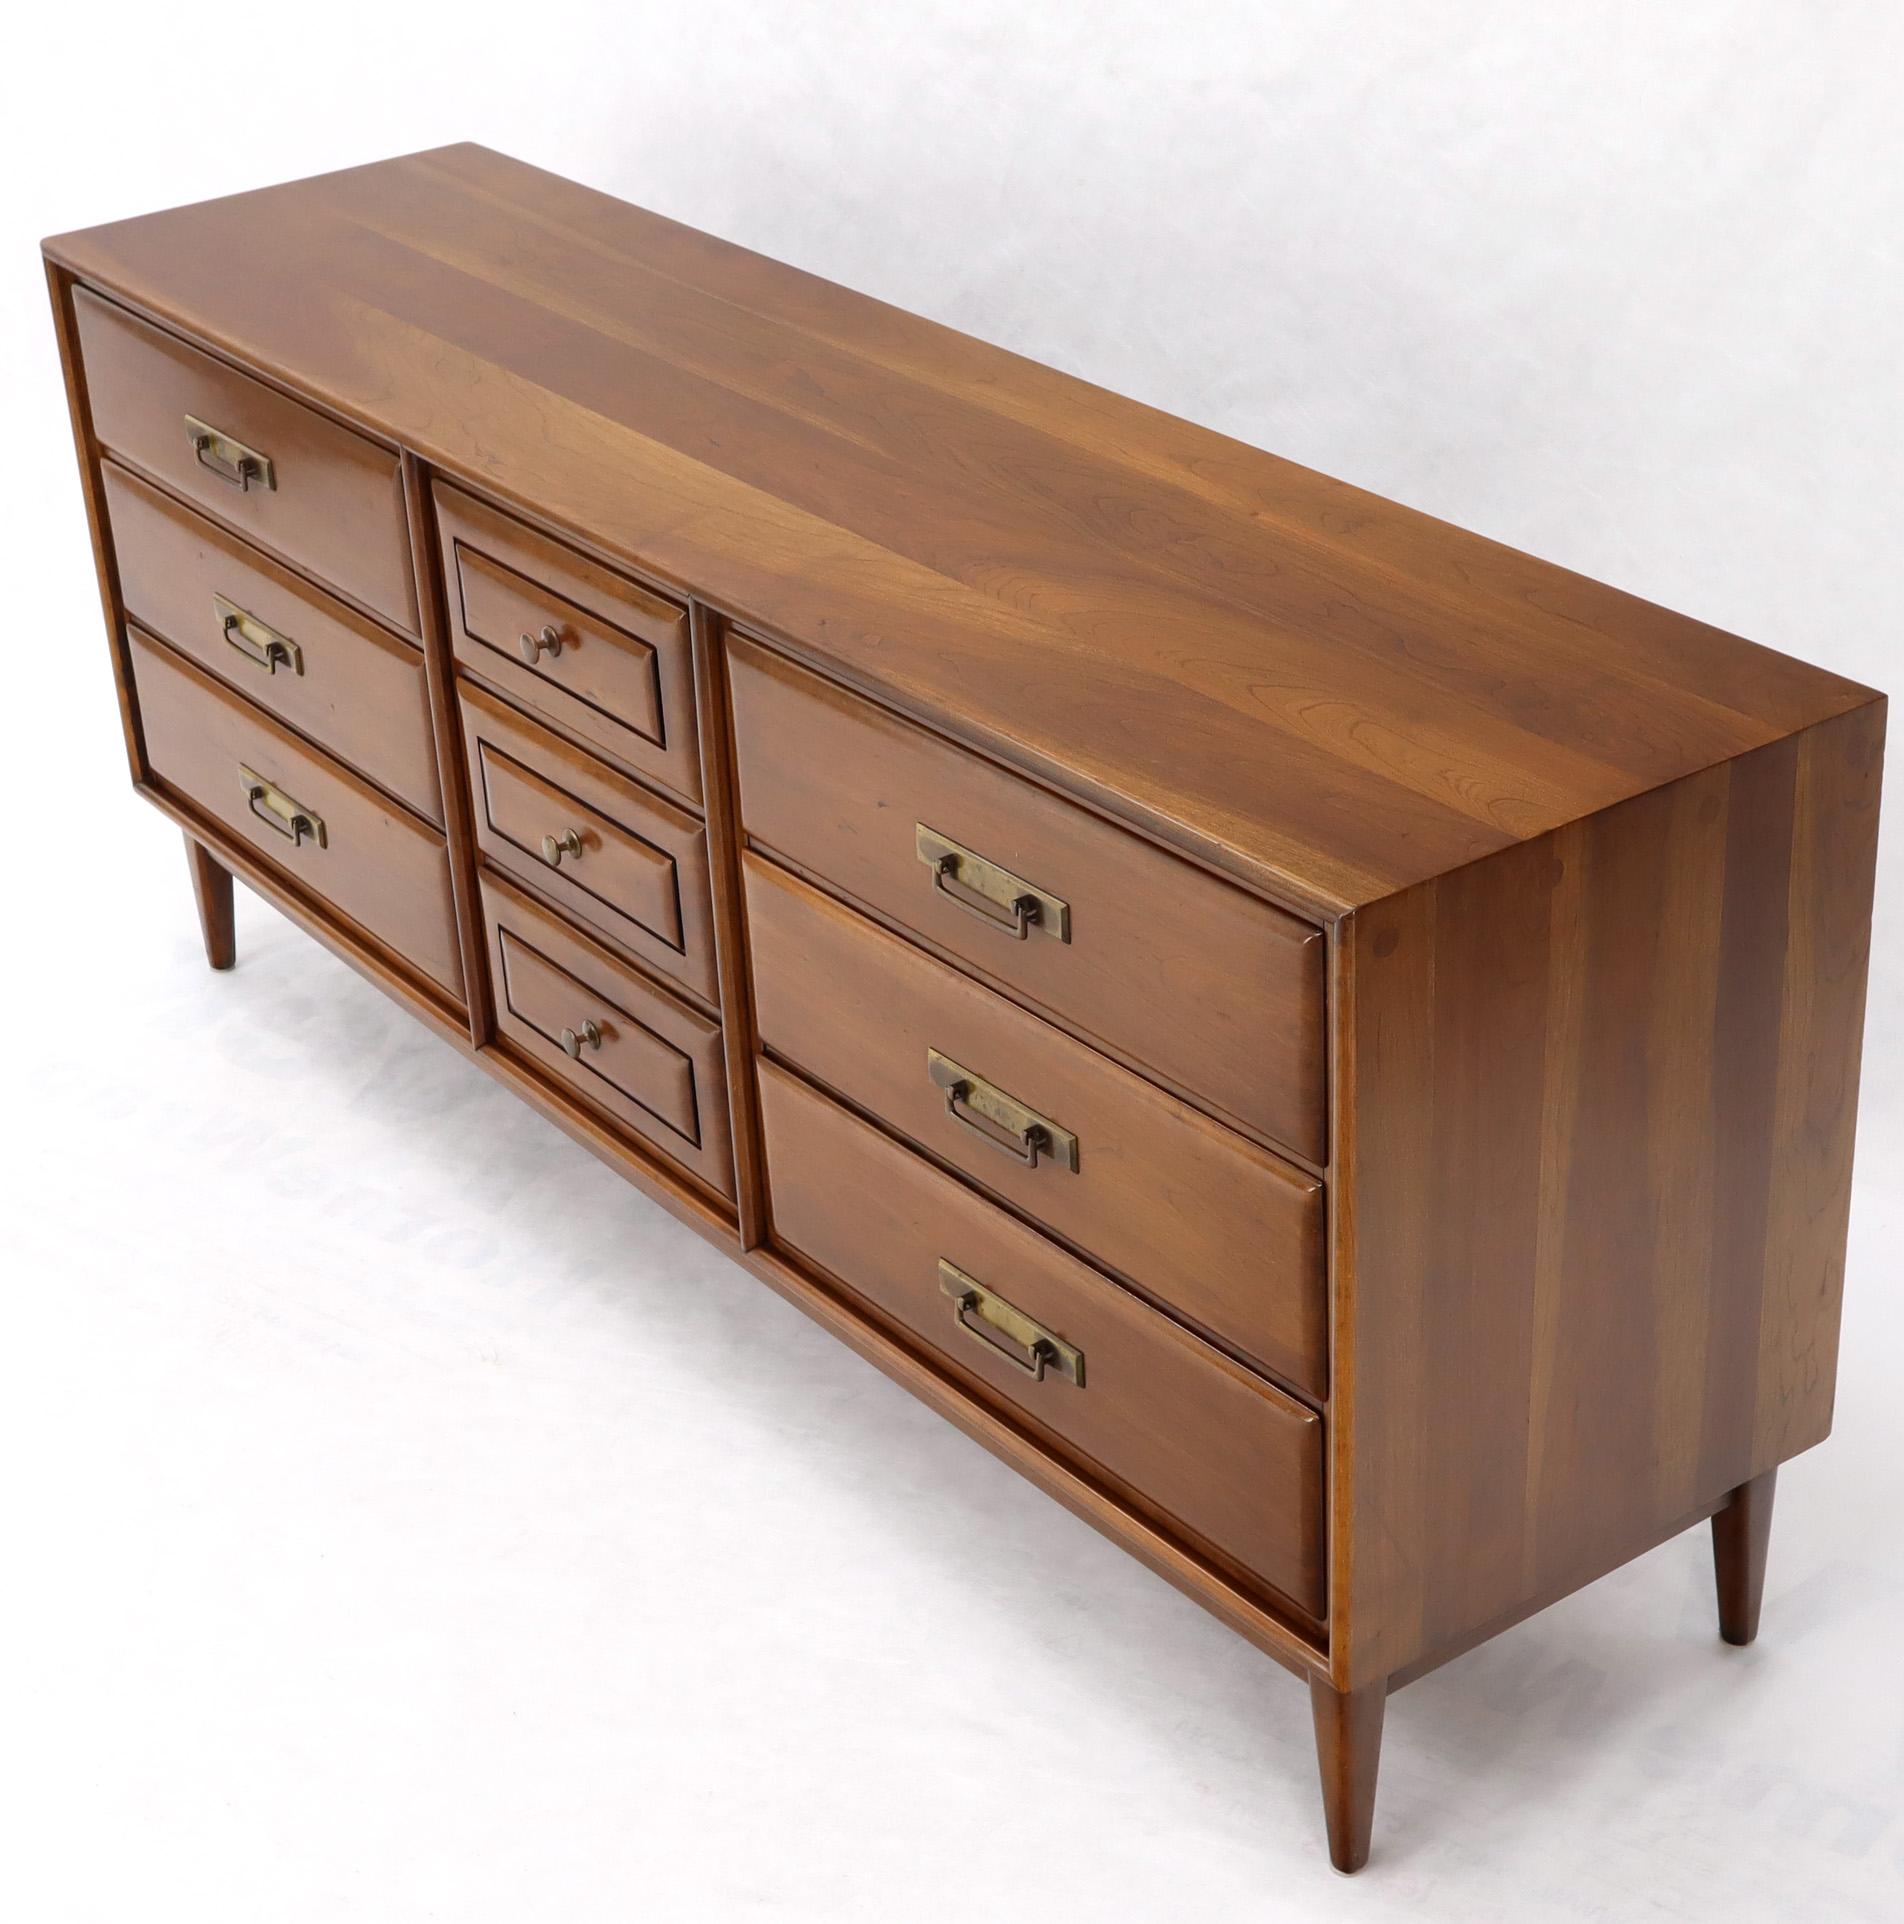 Lacquered Solid Cherry Mid-Century Modern Triple Dresser by Haywood Wakefiled